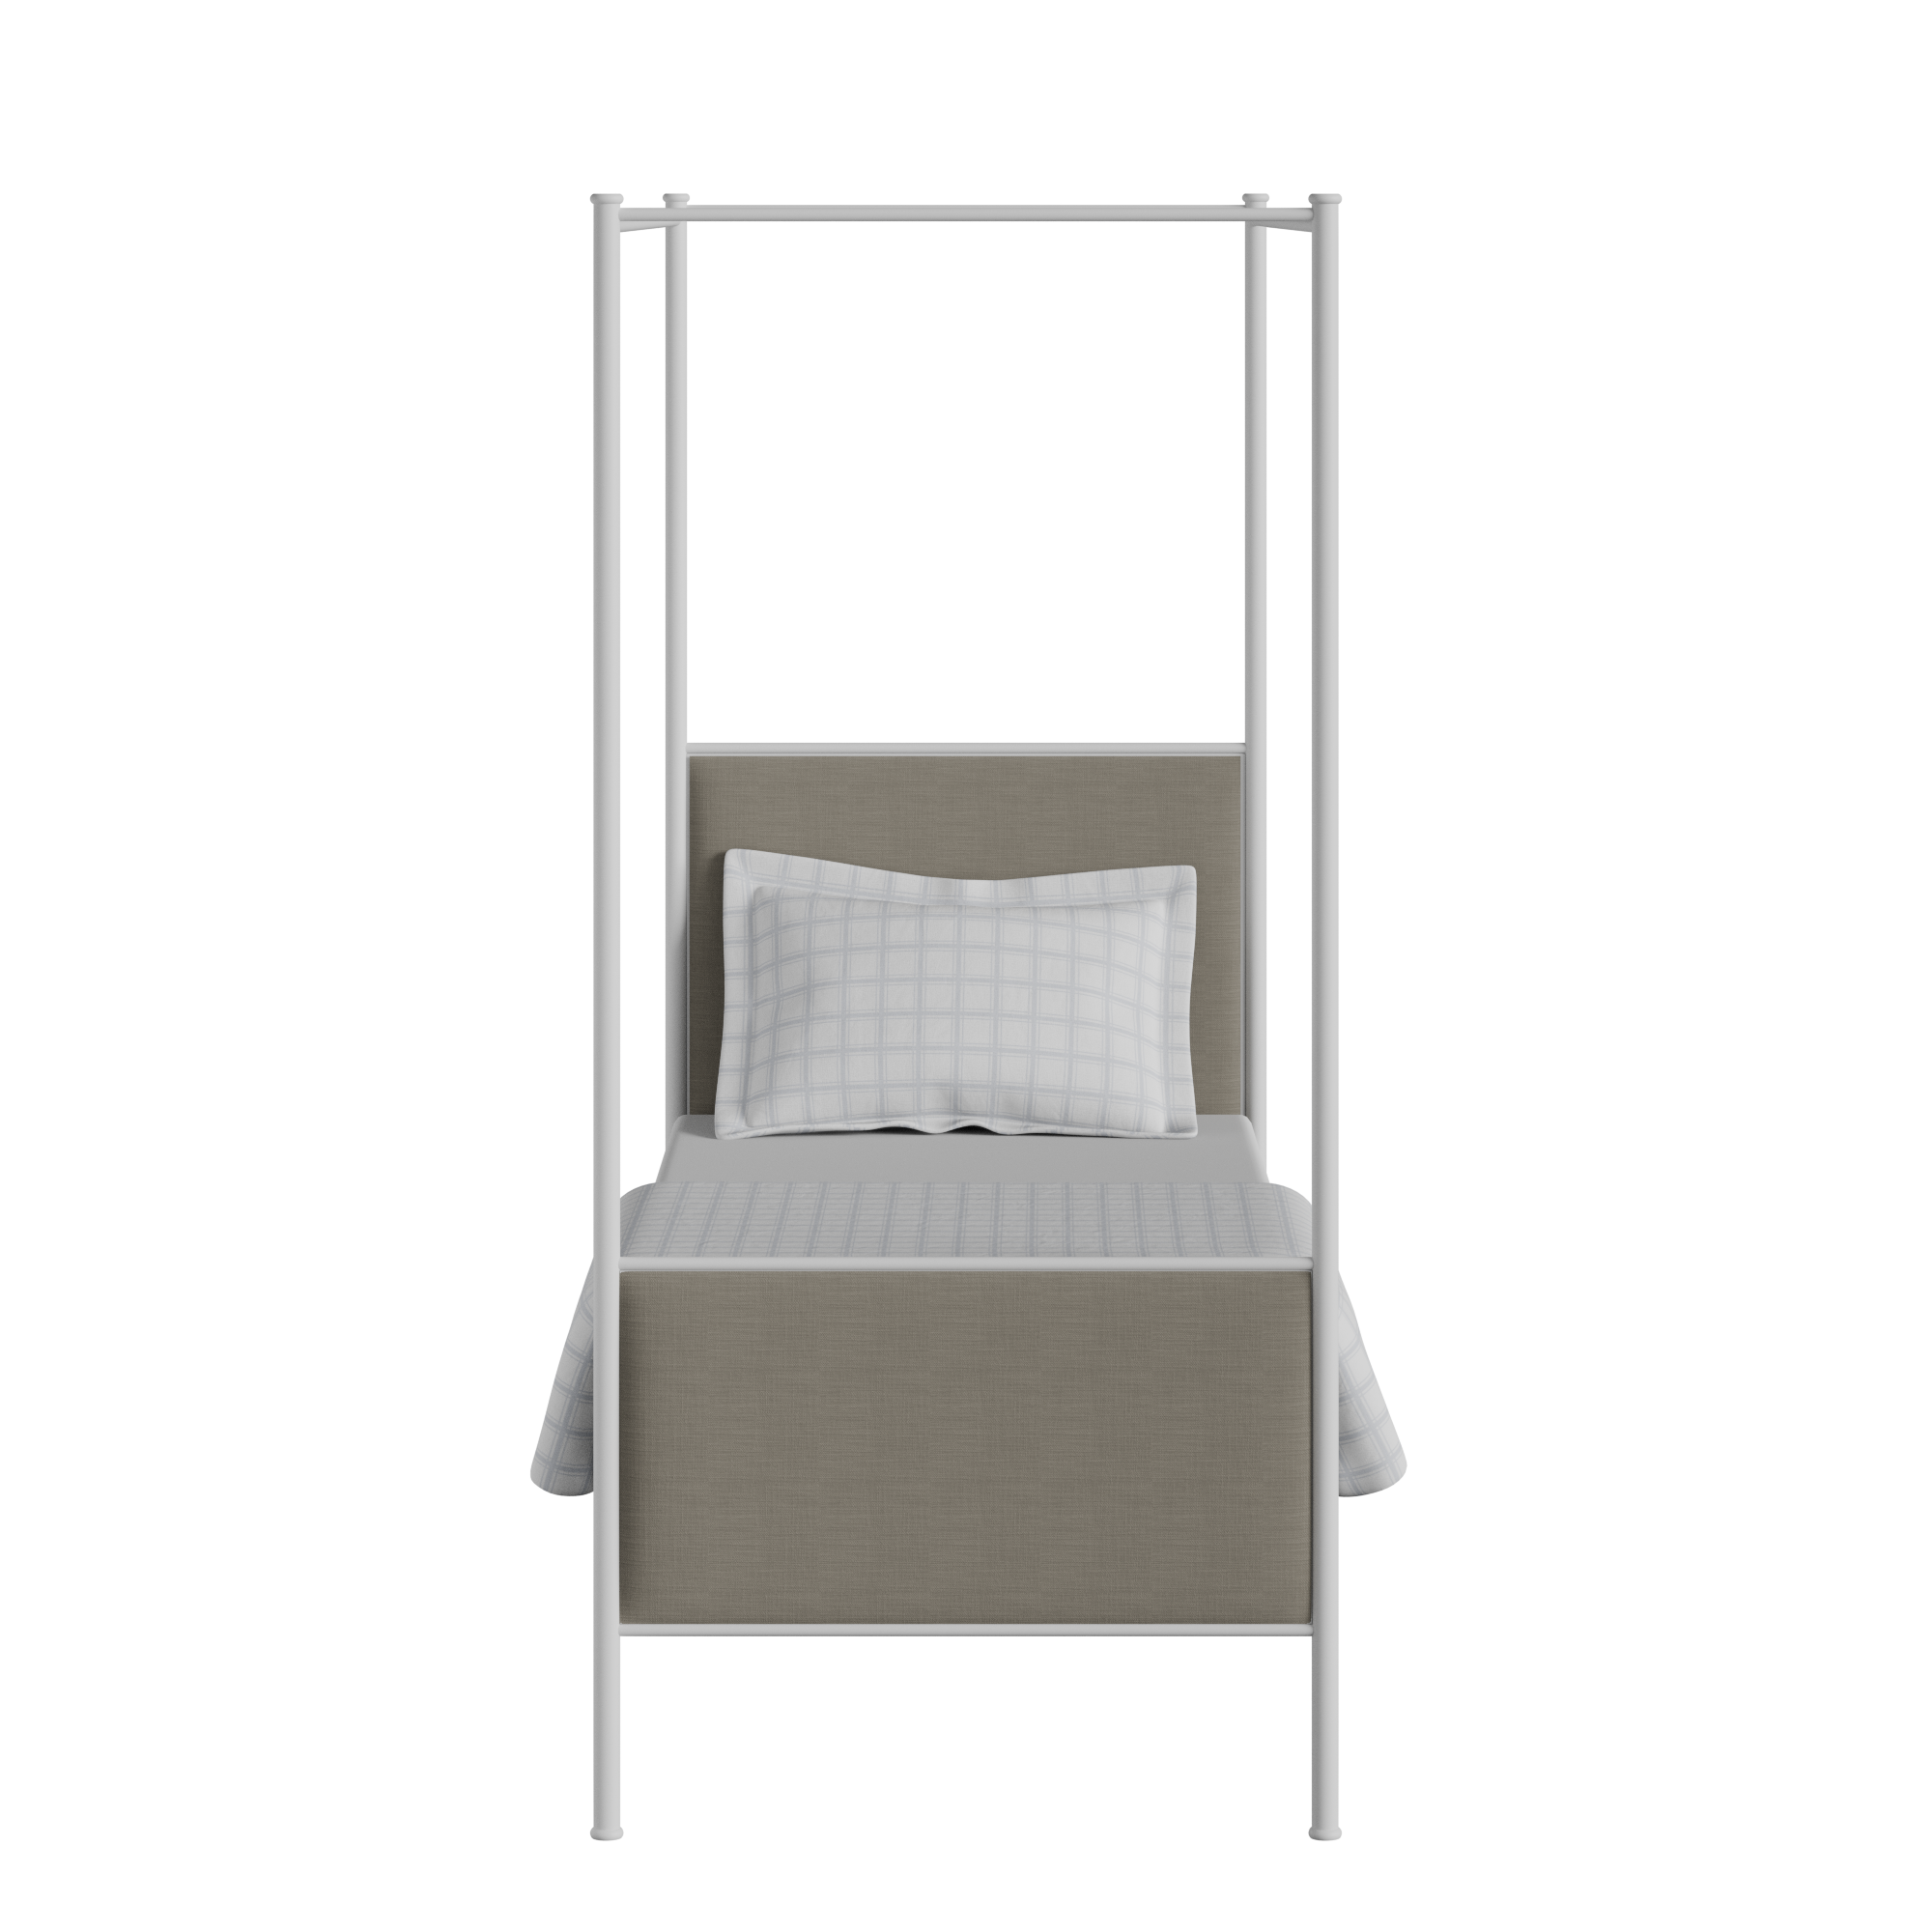 Reims iron/metal single bed in white